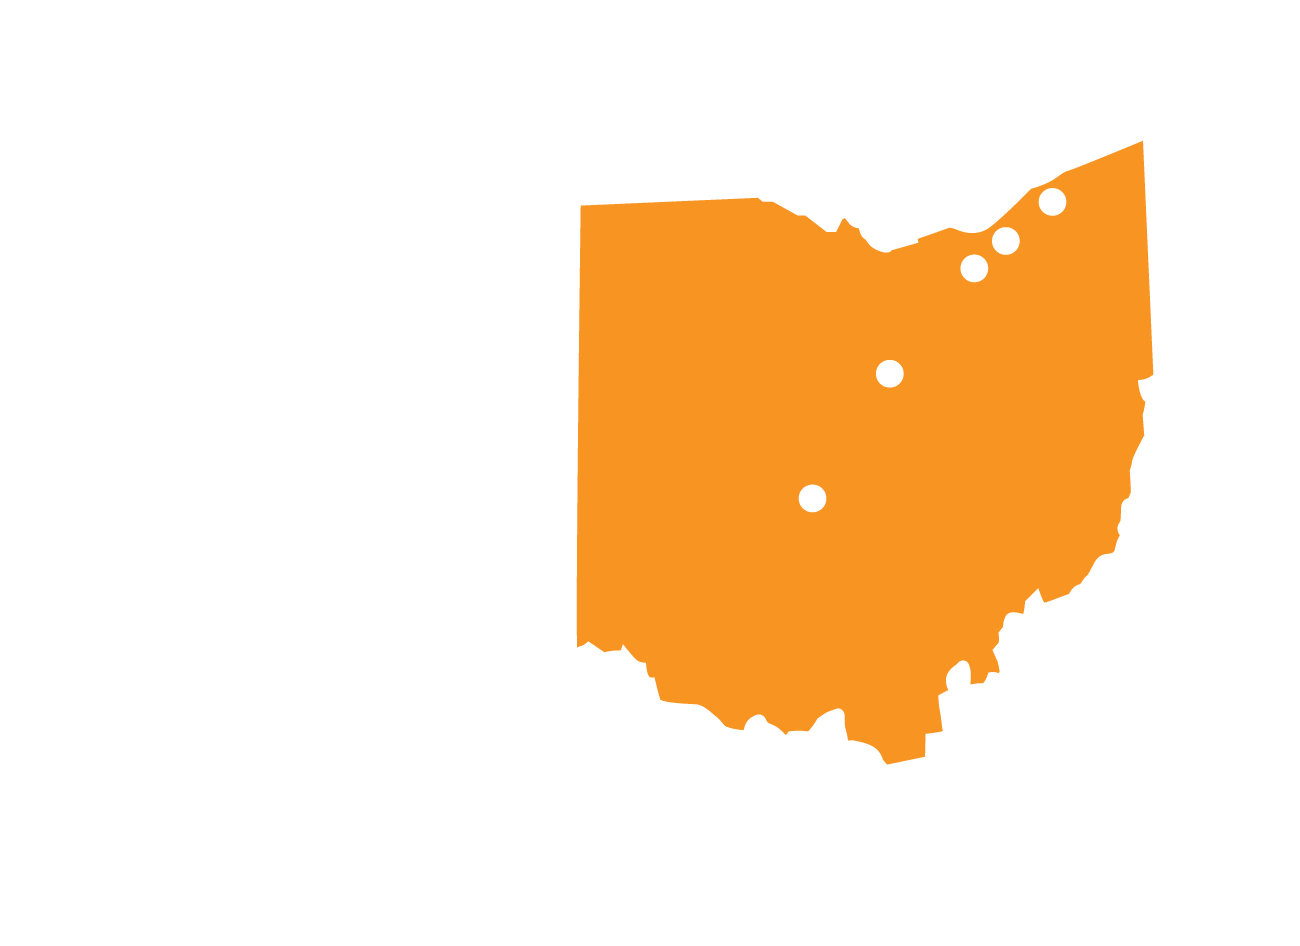 150+ Employees – Six Locations – One Firm